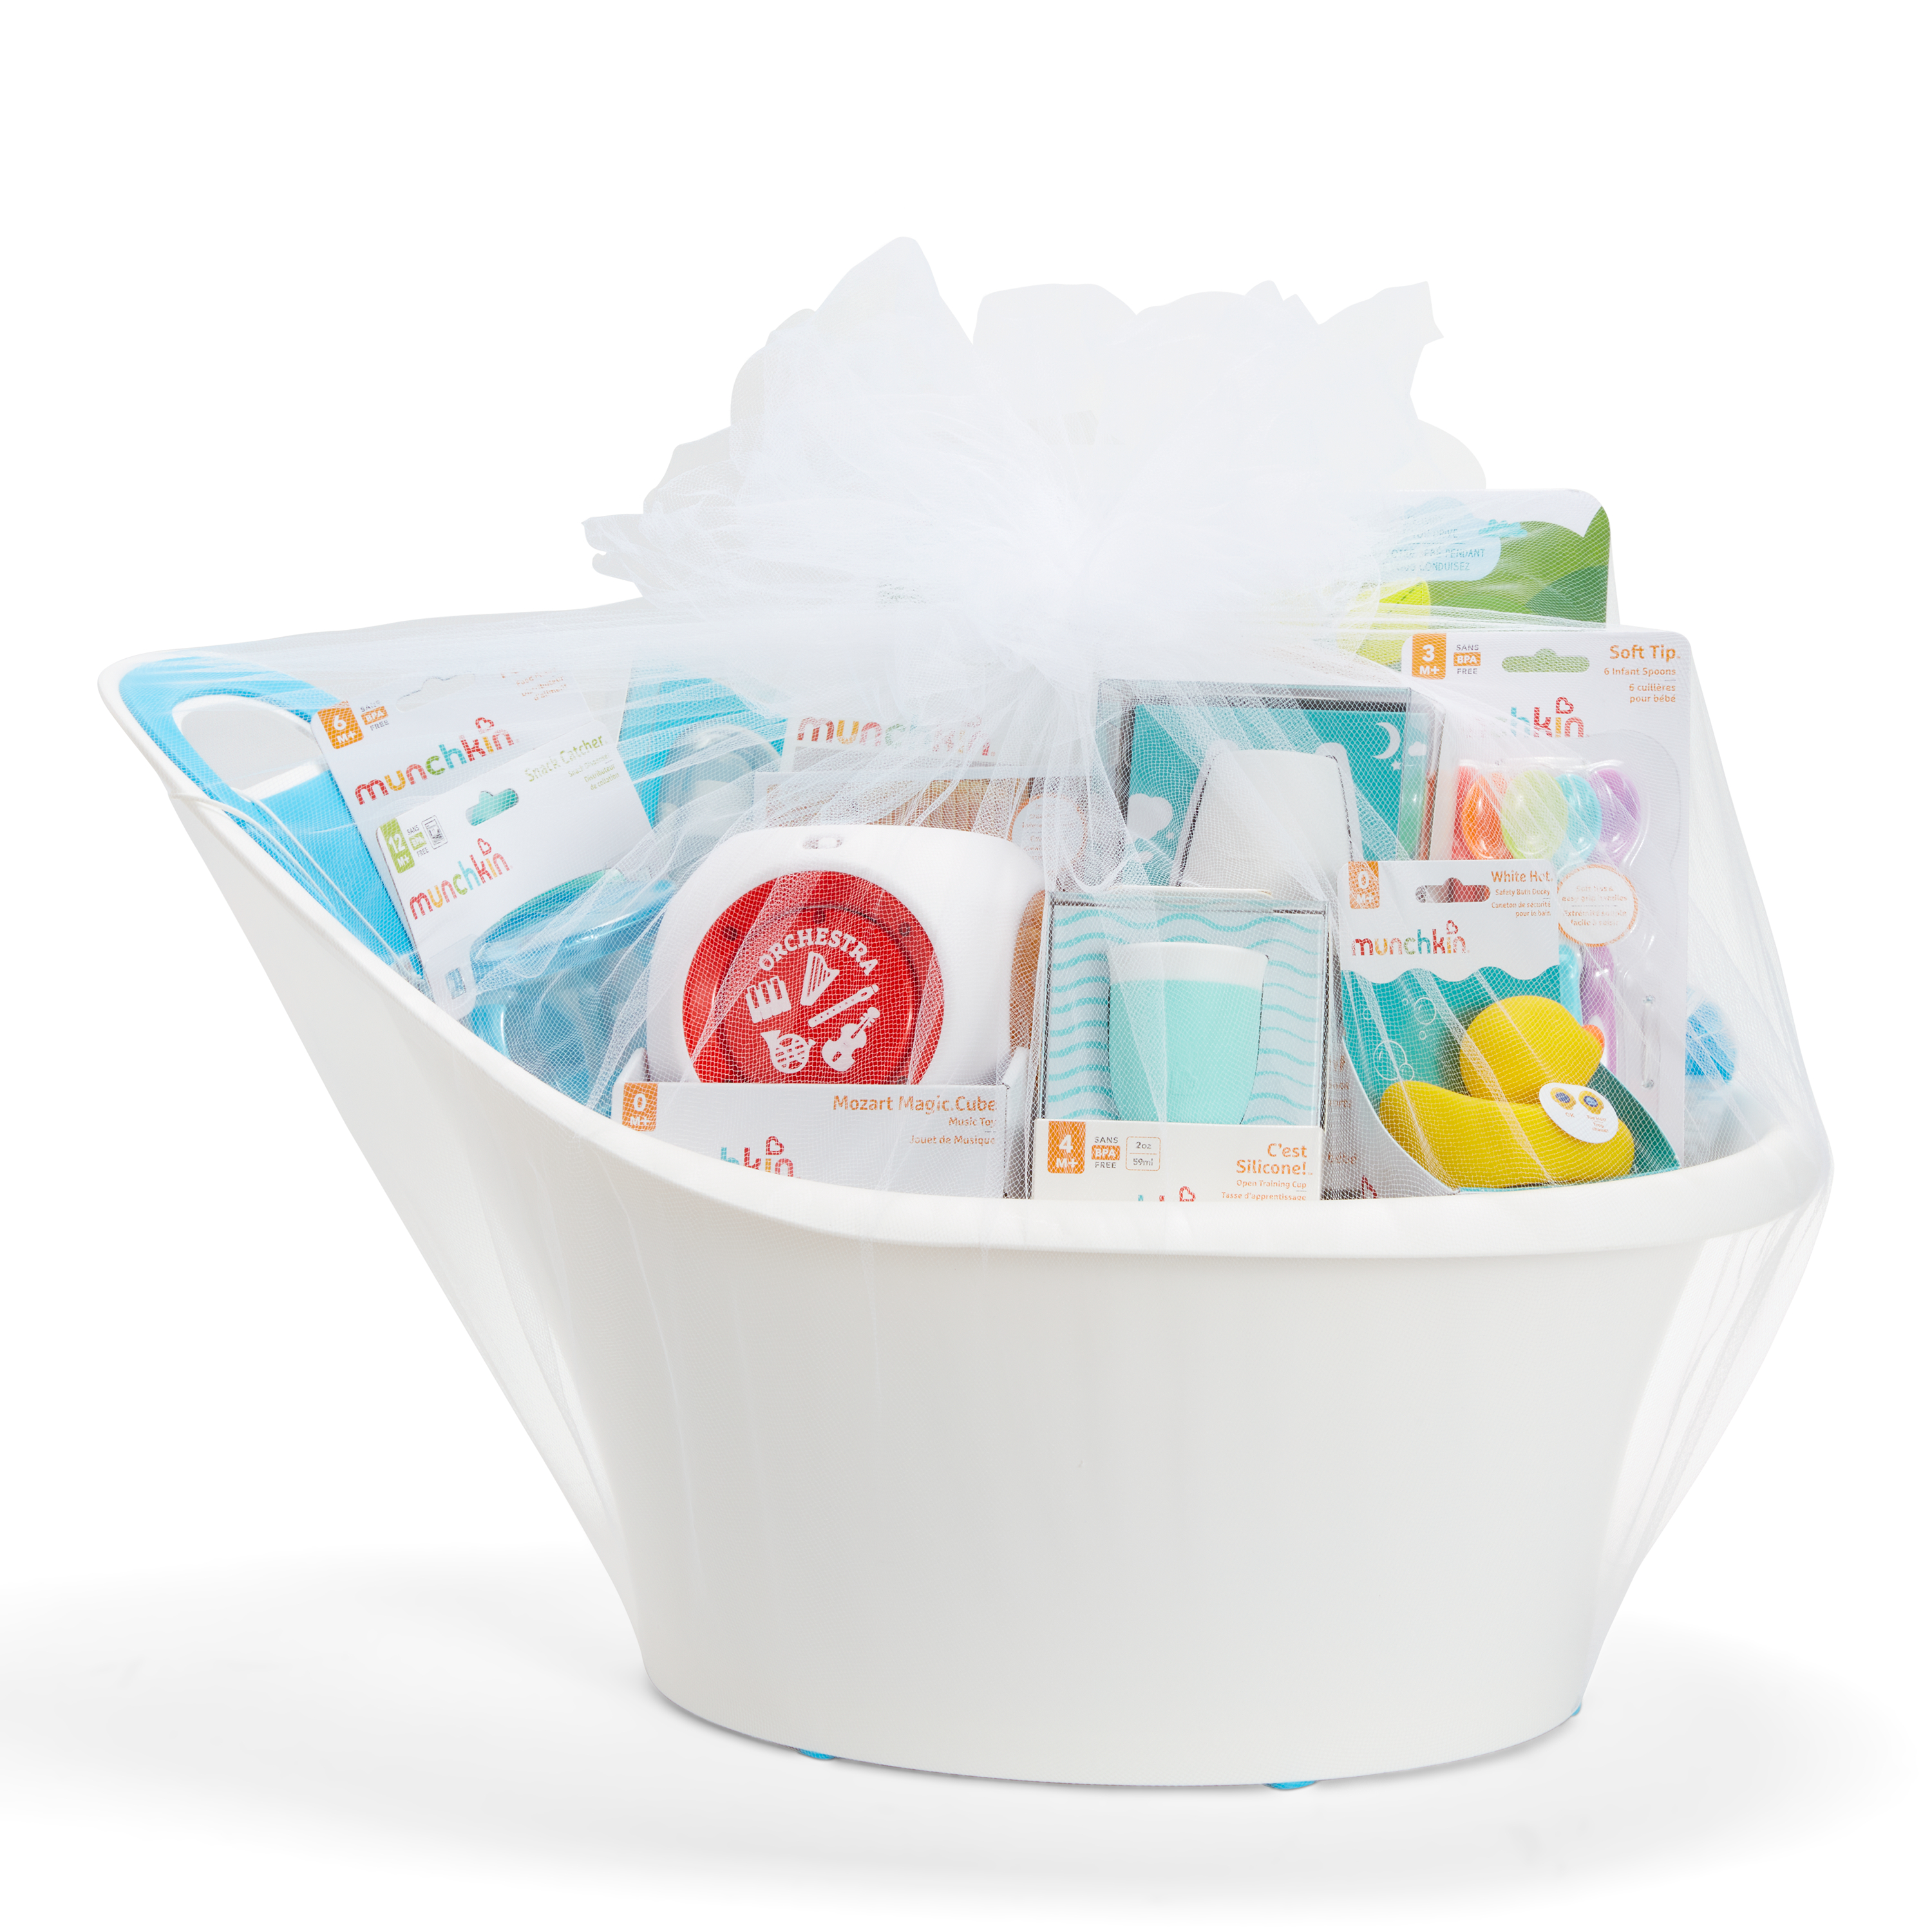 Munchkin® My Munchkin Gift Basket, Great for Baby Showers, Includes 15 Baby Products, Neutral, Unisex - image 2 of 30